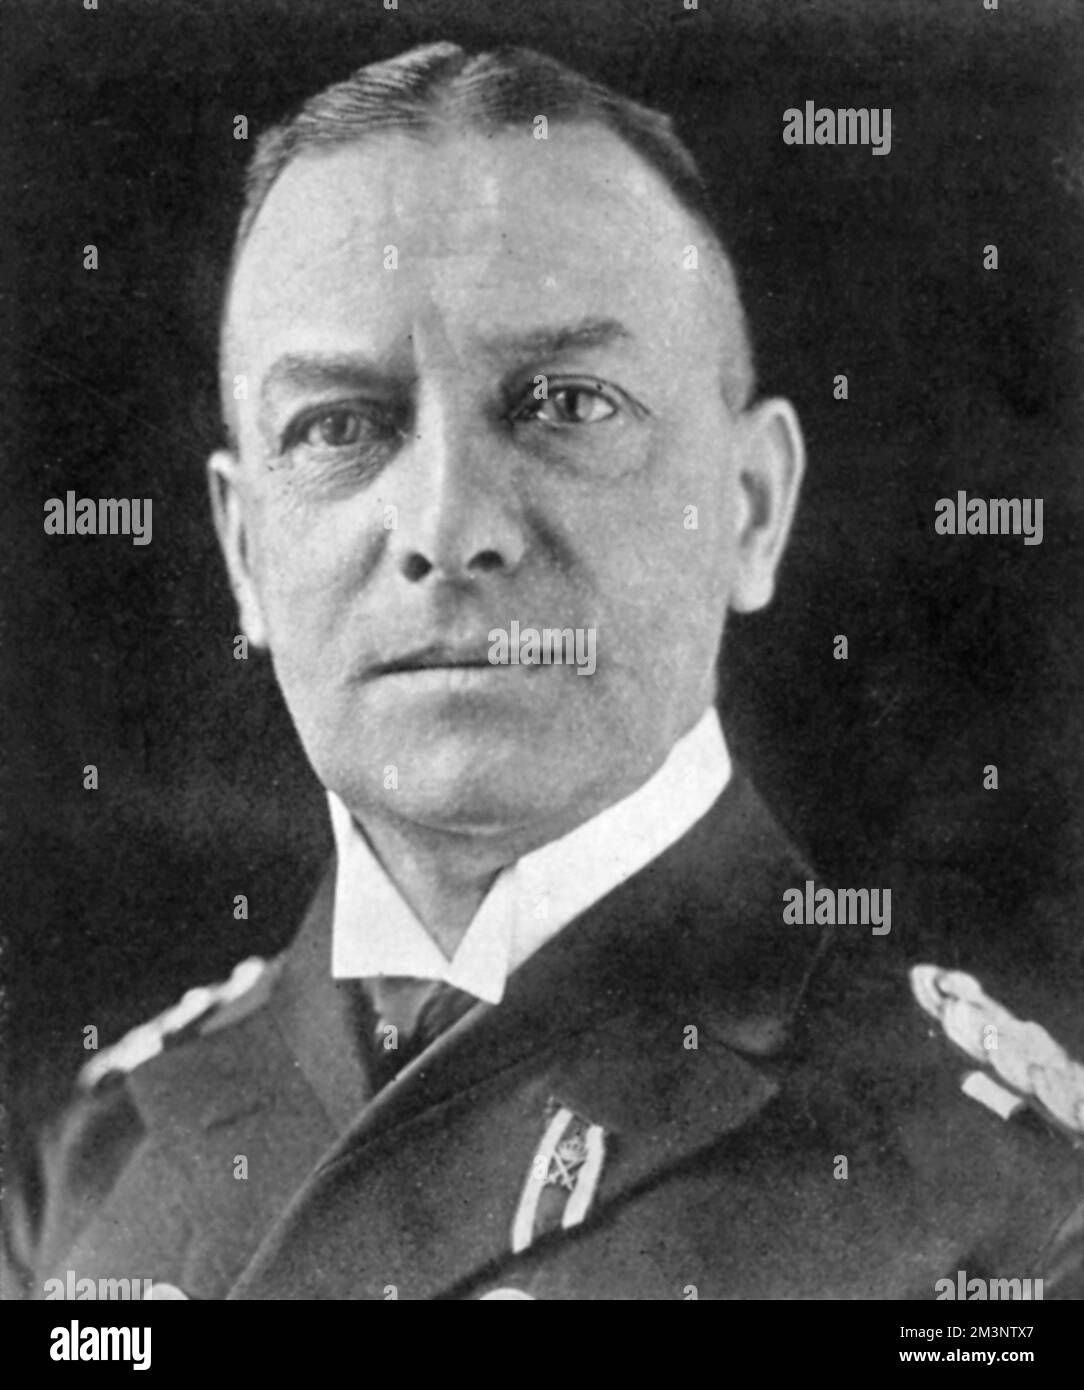 Erich Johann Albert Raeder (24 April 1876  6 November 1960) German naval leader in Germany before and during World War II. Raeder attained the highest possible naval rankthat of Gro&#x7e1;dmiral (Grand Admiral)  in 1939, becoming the first person to hold that rank since Alfred von Tirpitz. Raeder led the Kriegsmarine (German Navy) for the first half of the war, but resigned in 1943 and was replaced by Karl D&#x1aea74;z. He was sentenced to life in prison at the Nuremberg Trials, but was later released.     Date: 1939 Stock Photo